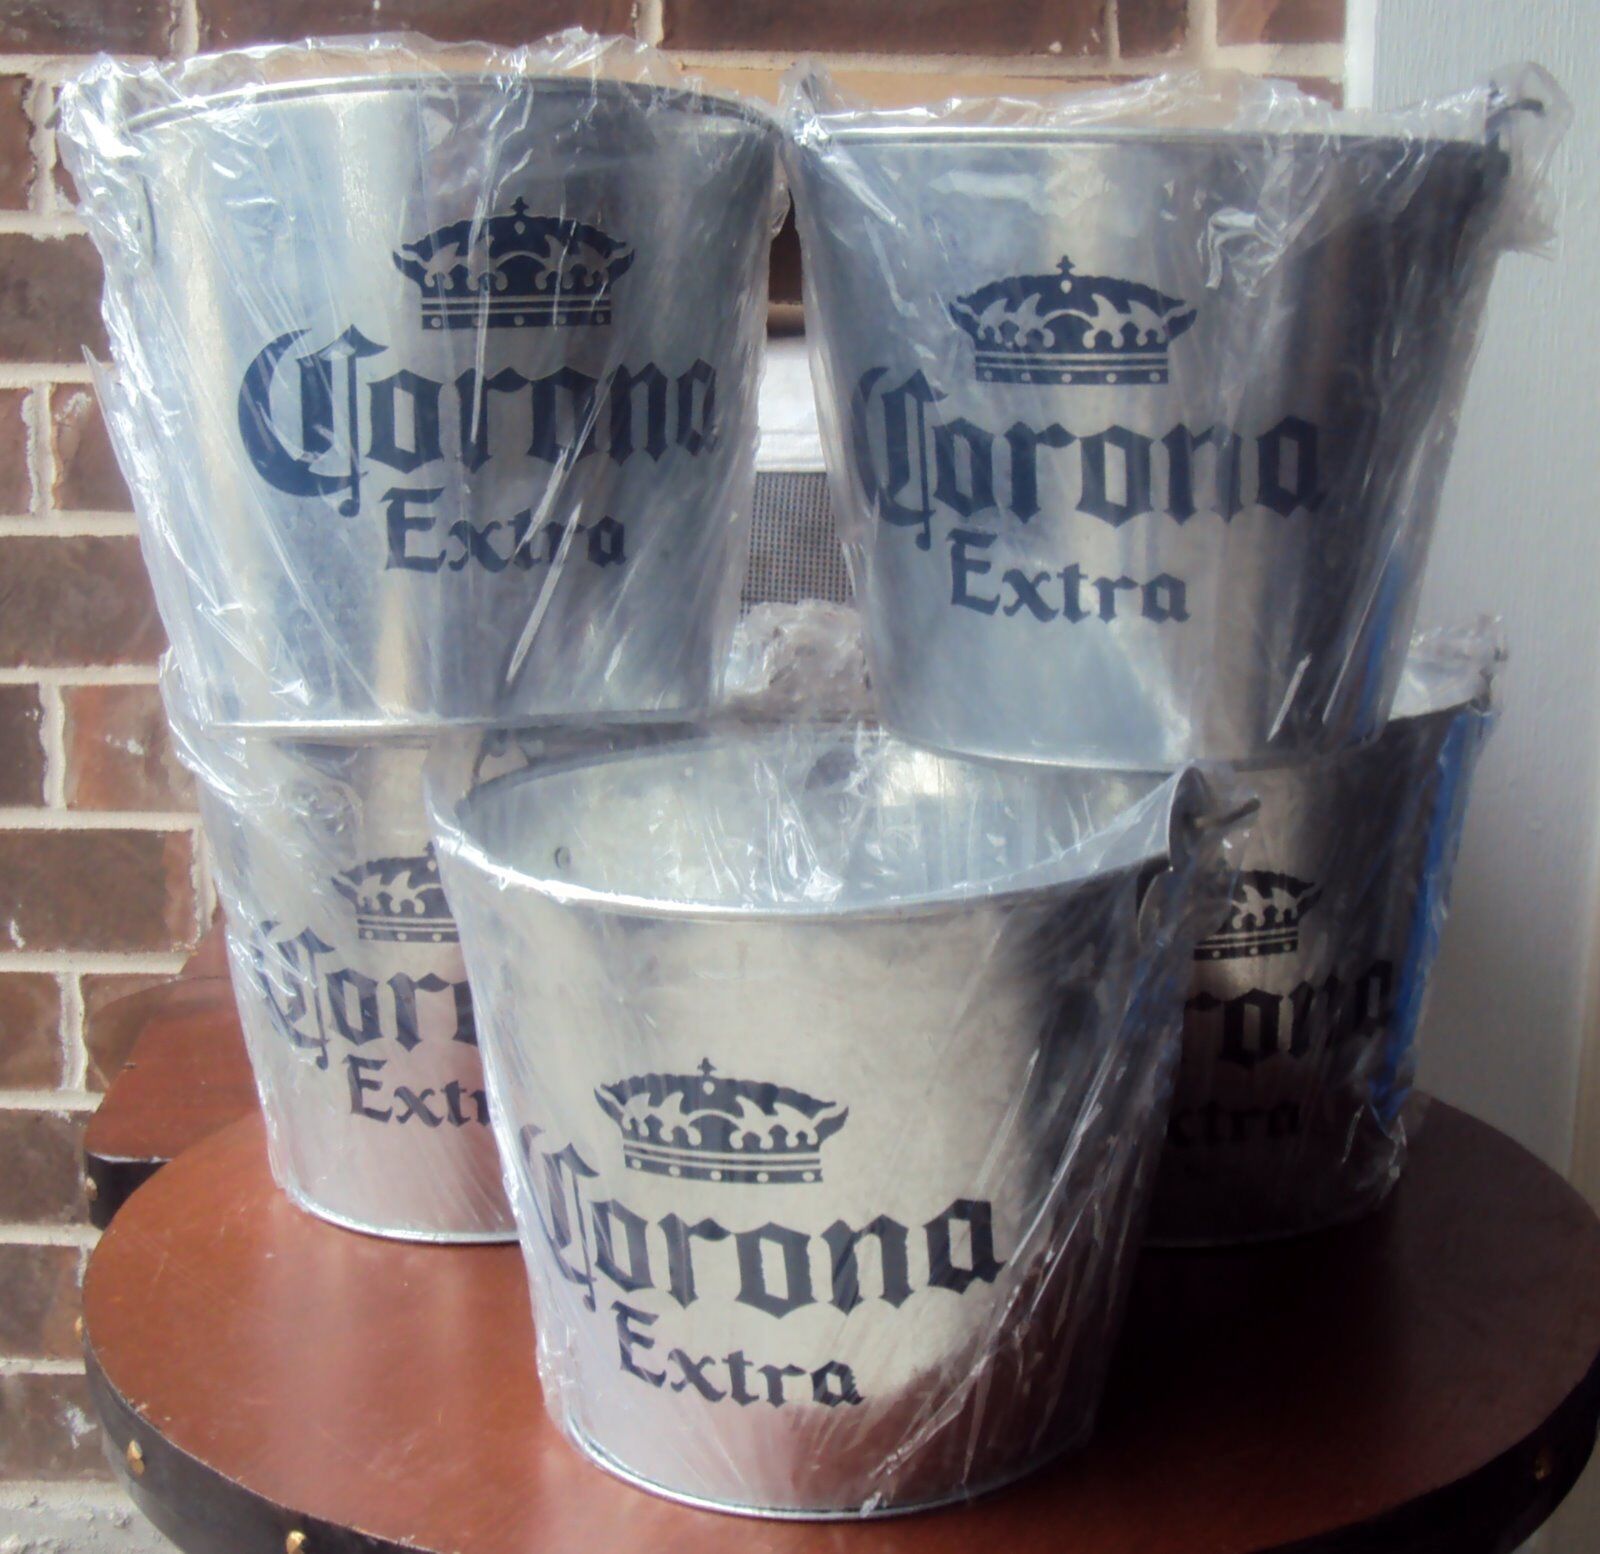 5 CORONA EXTRA 5qt Galvanized Beer Buckets with Openers on the side (BRAND NEW)